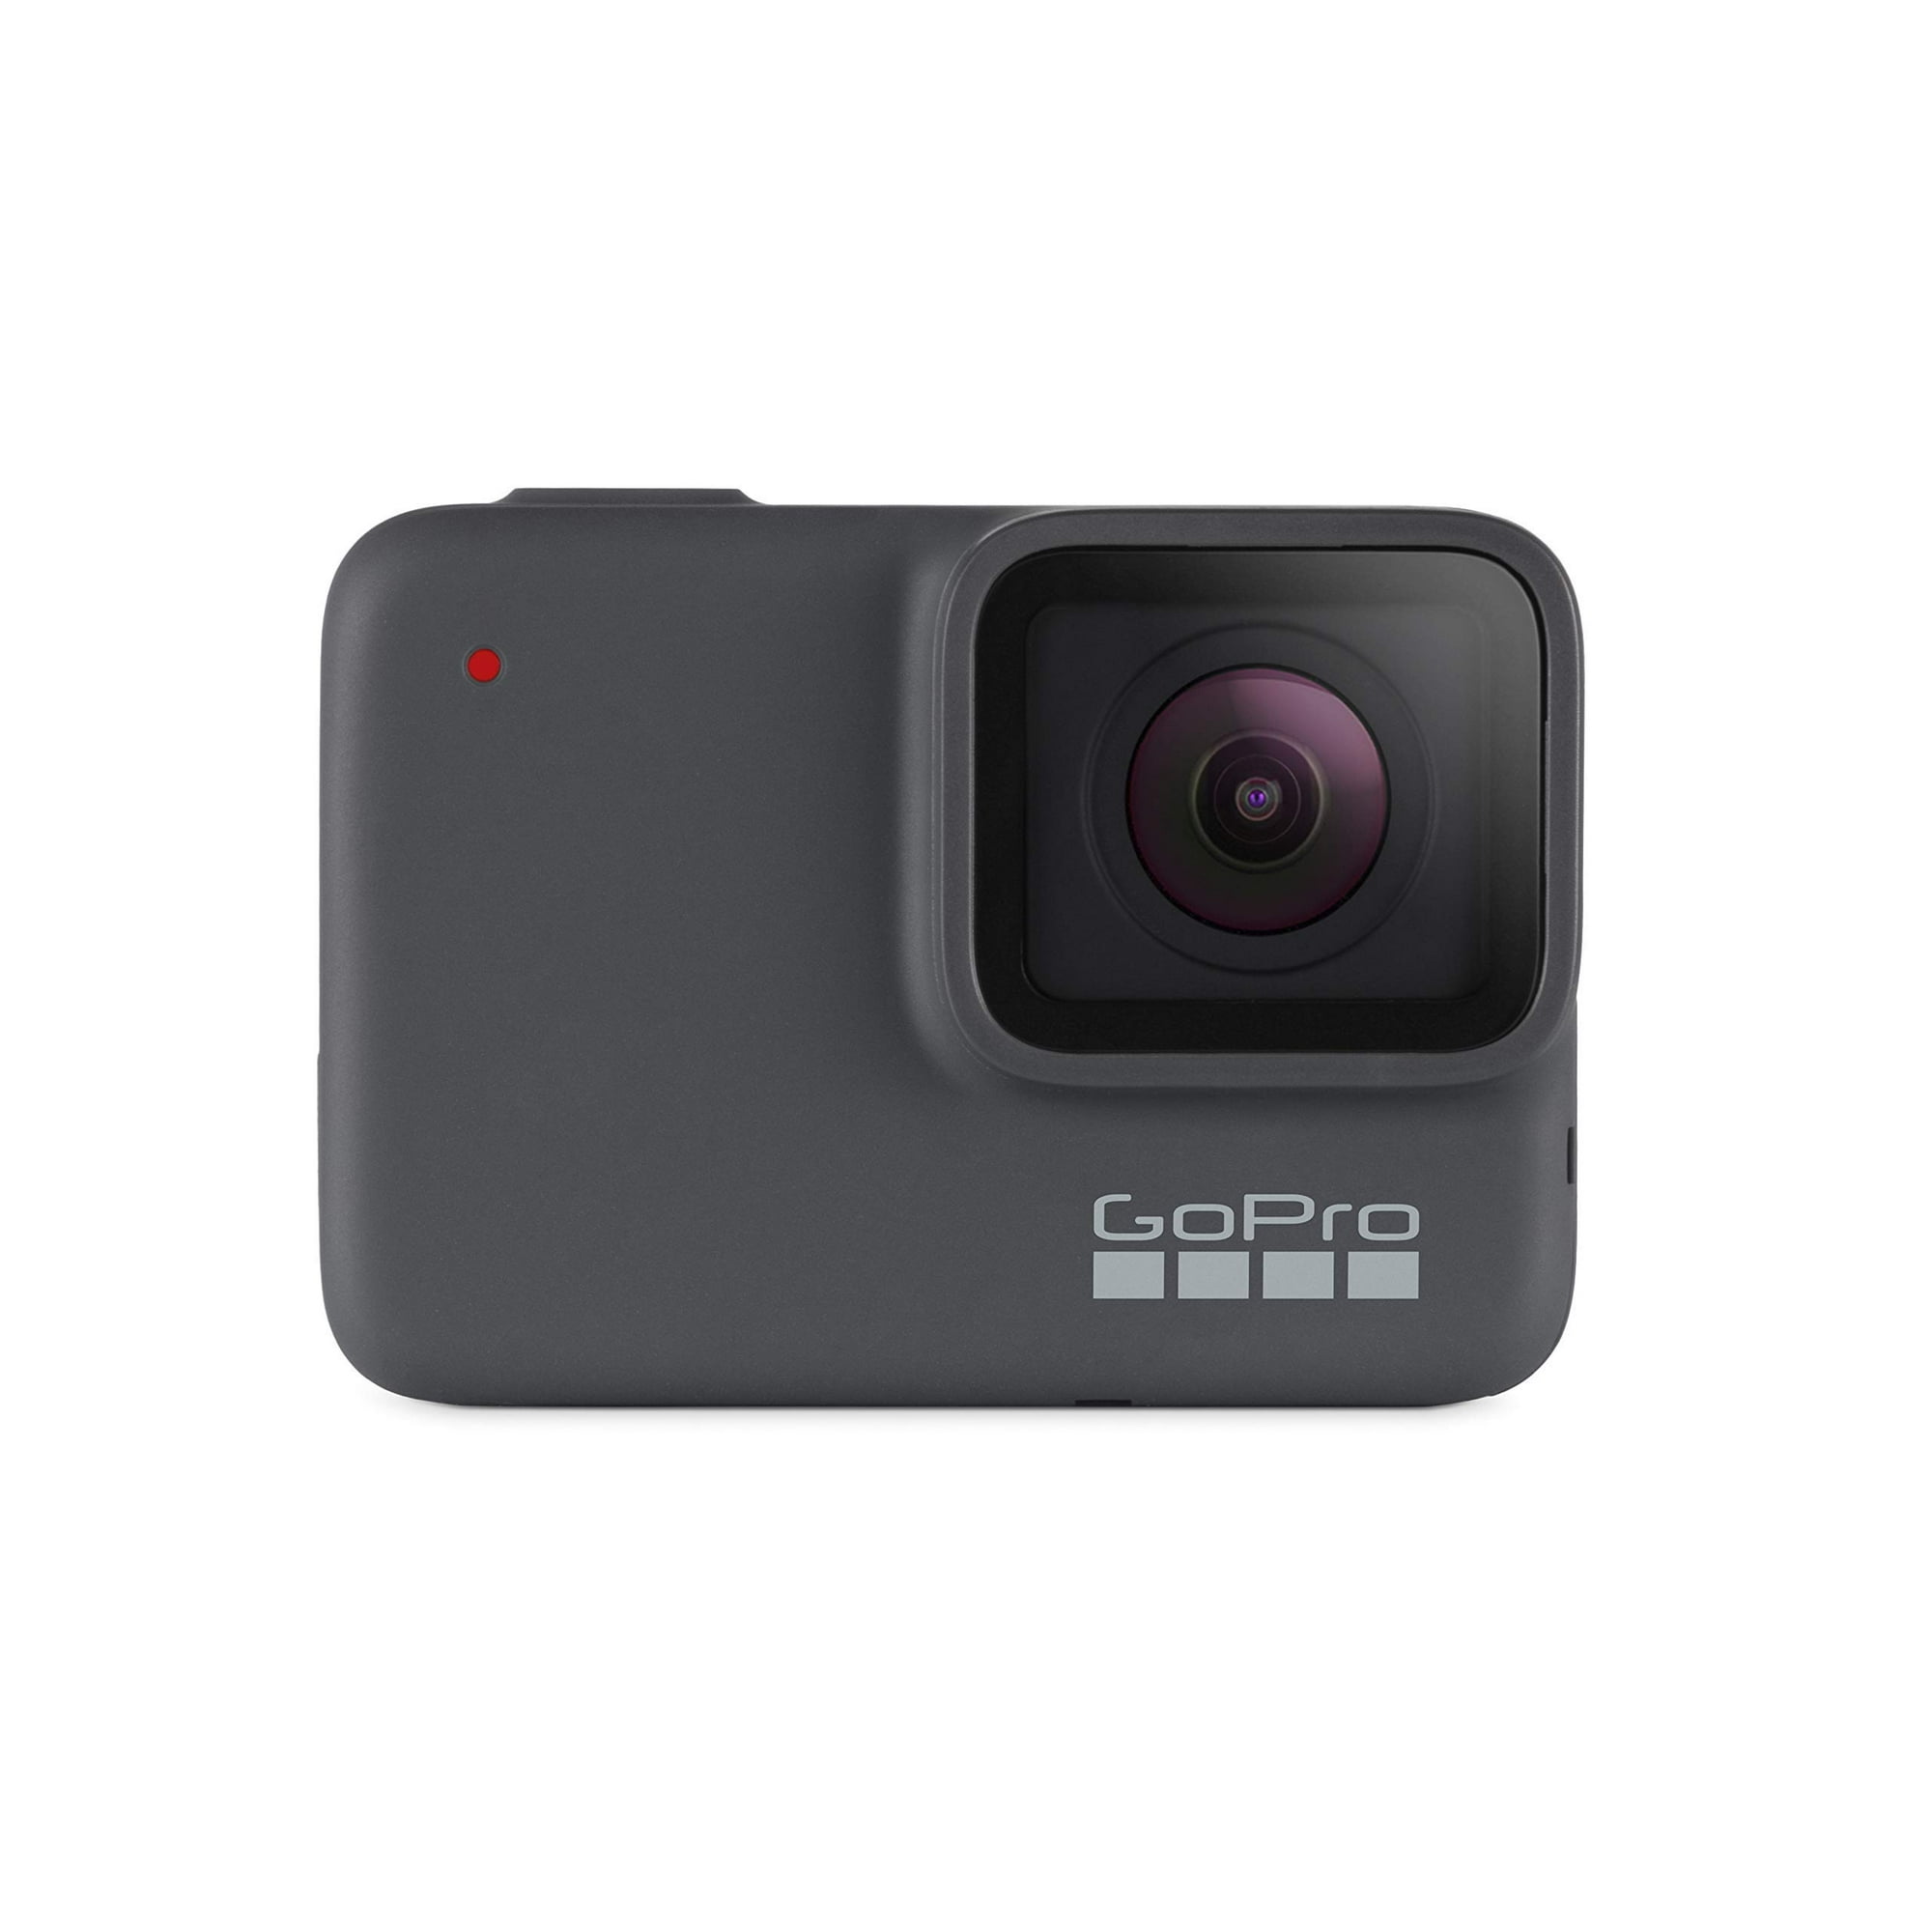 GoPro HERO7 Silver Waterproof Digital Action Camera with Touch